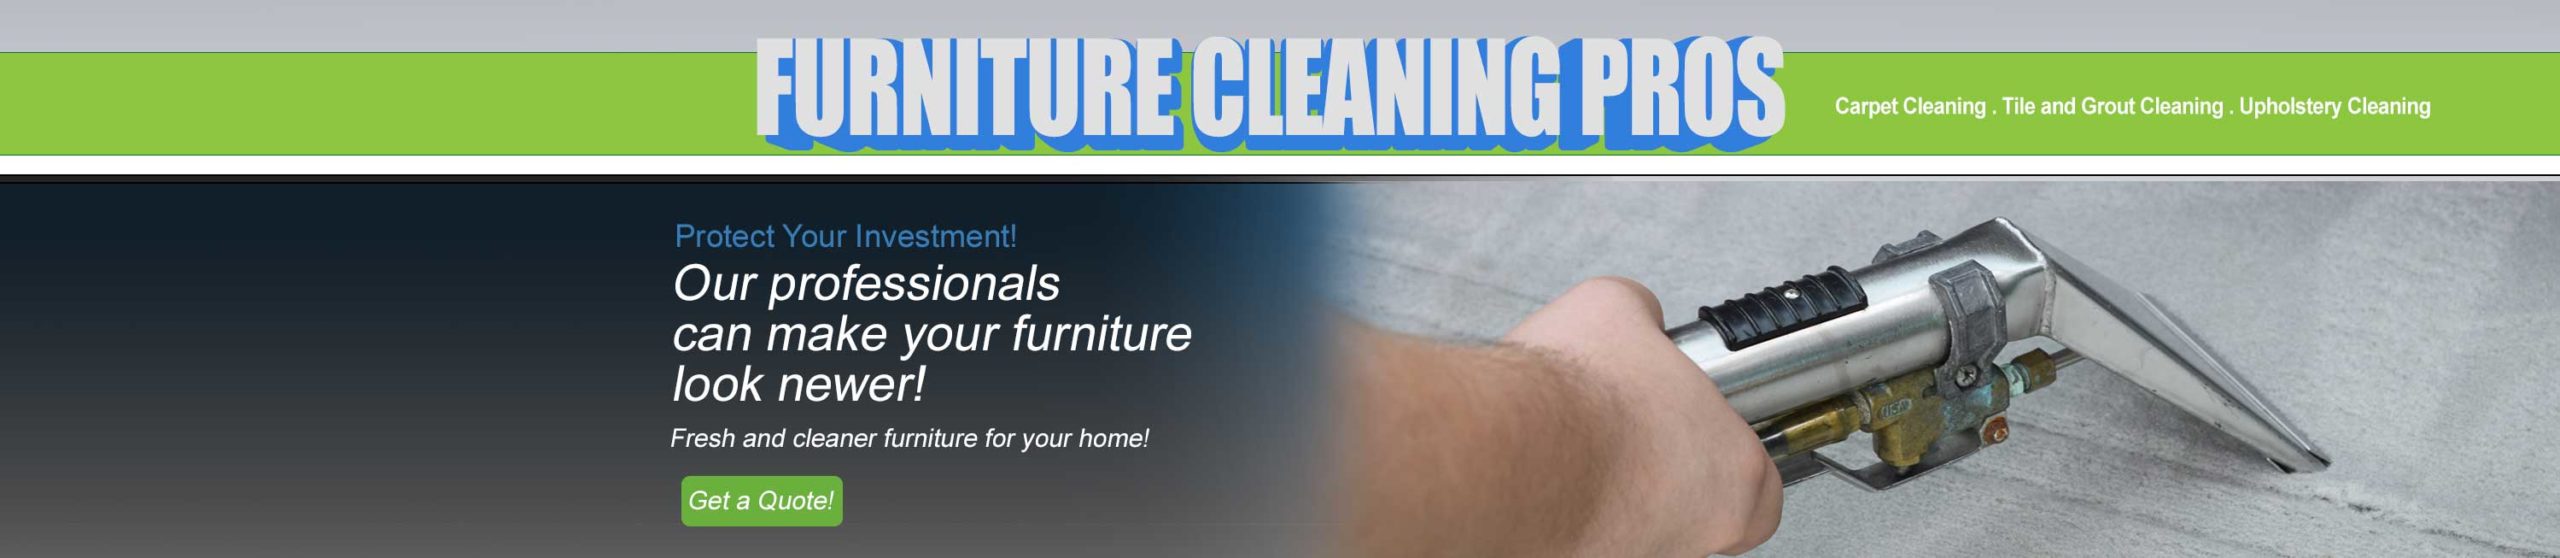 Furniture and upholstery cleaning in Litchfield Park AZ